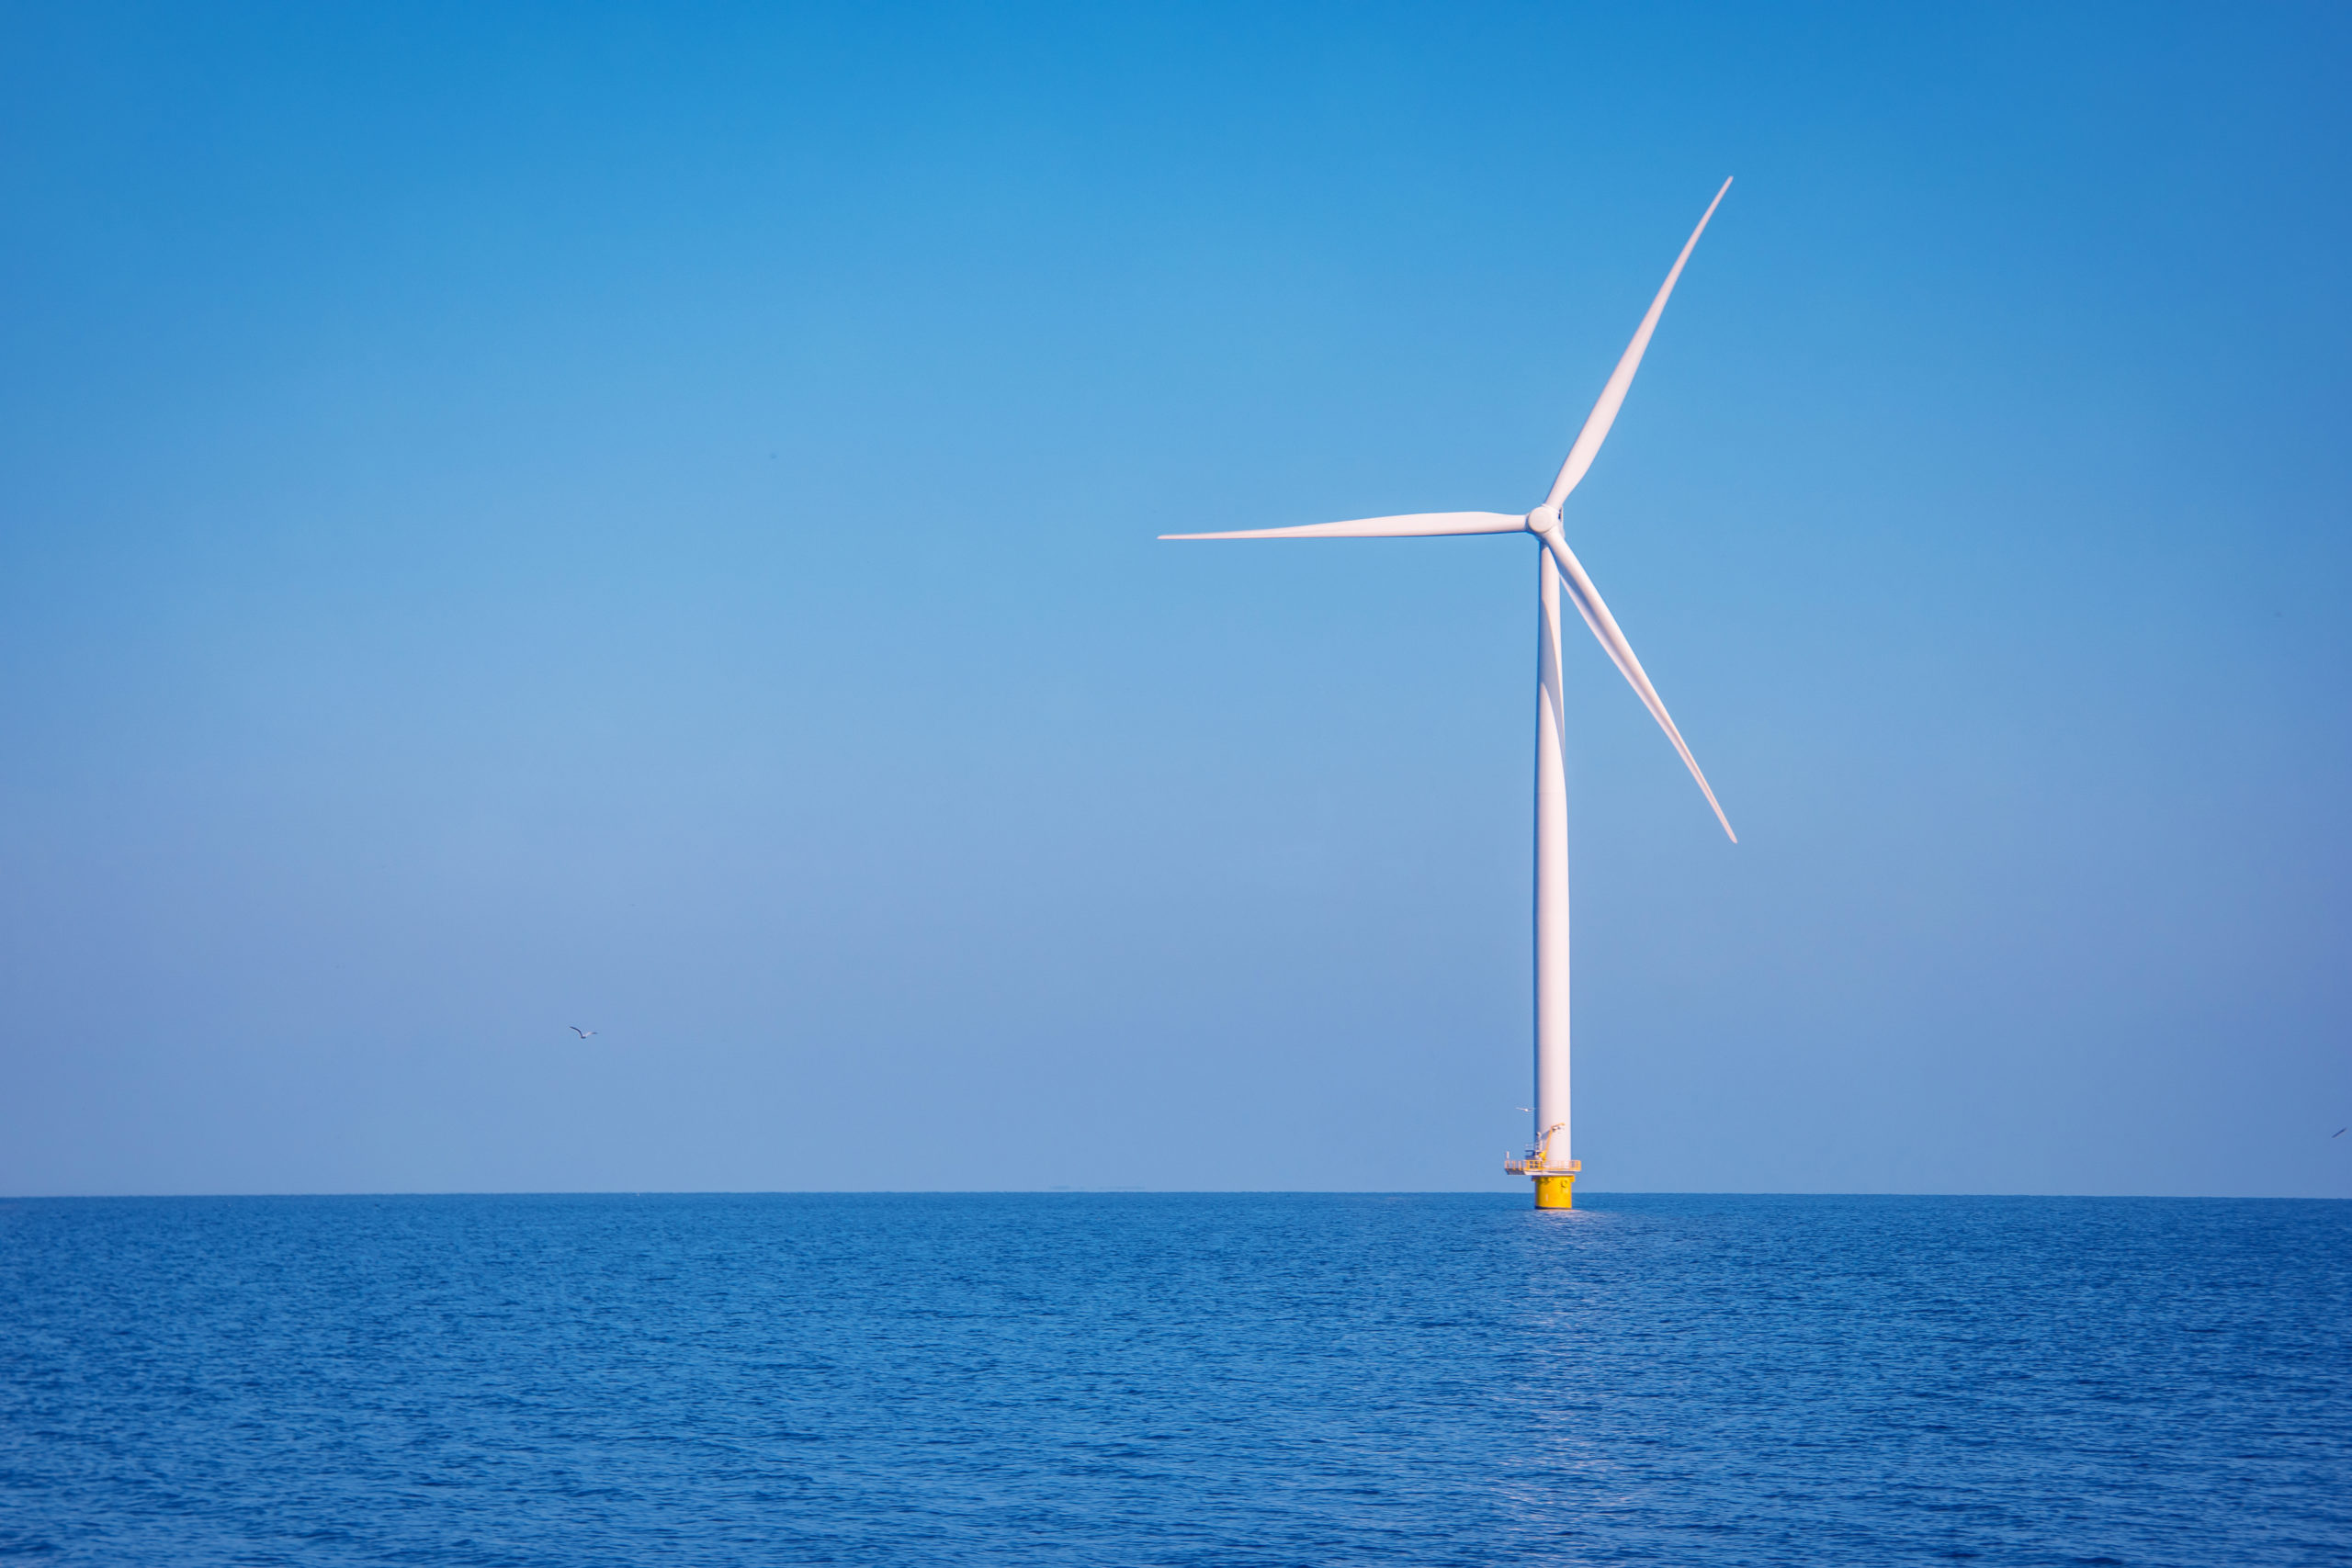 Op-Ed: Bringing Offshore Wind Power to the Grid